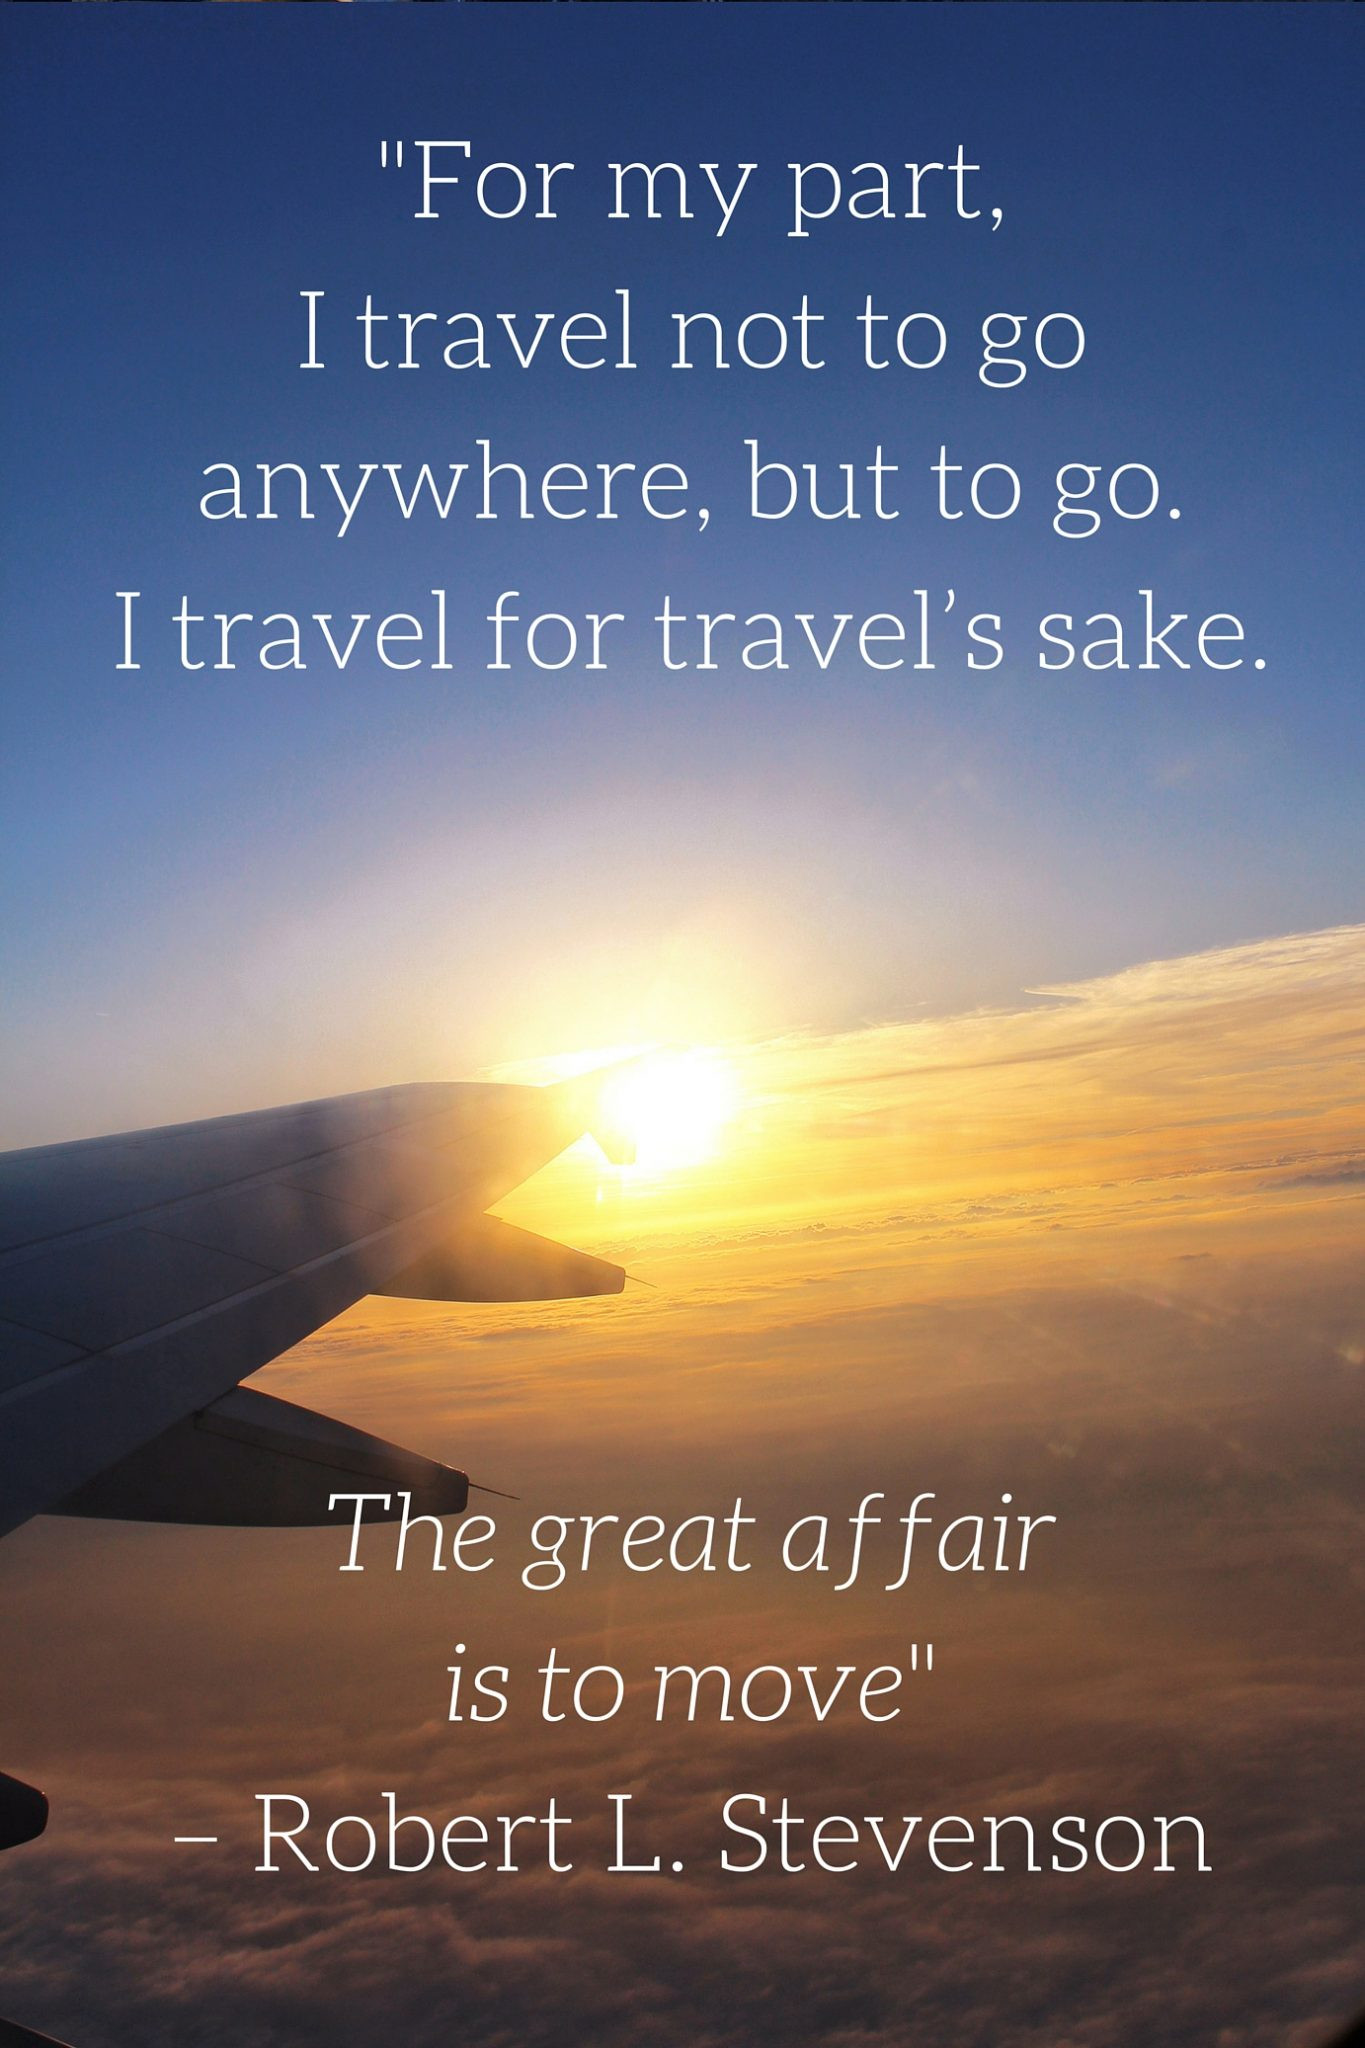 Images Of Inspirational Quotes
 12 Travel Quotes That Will Inspire You to Travel More